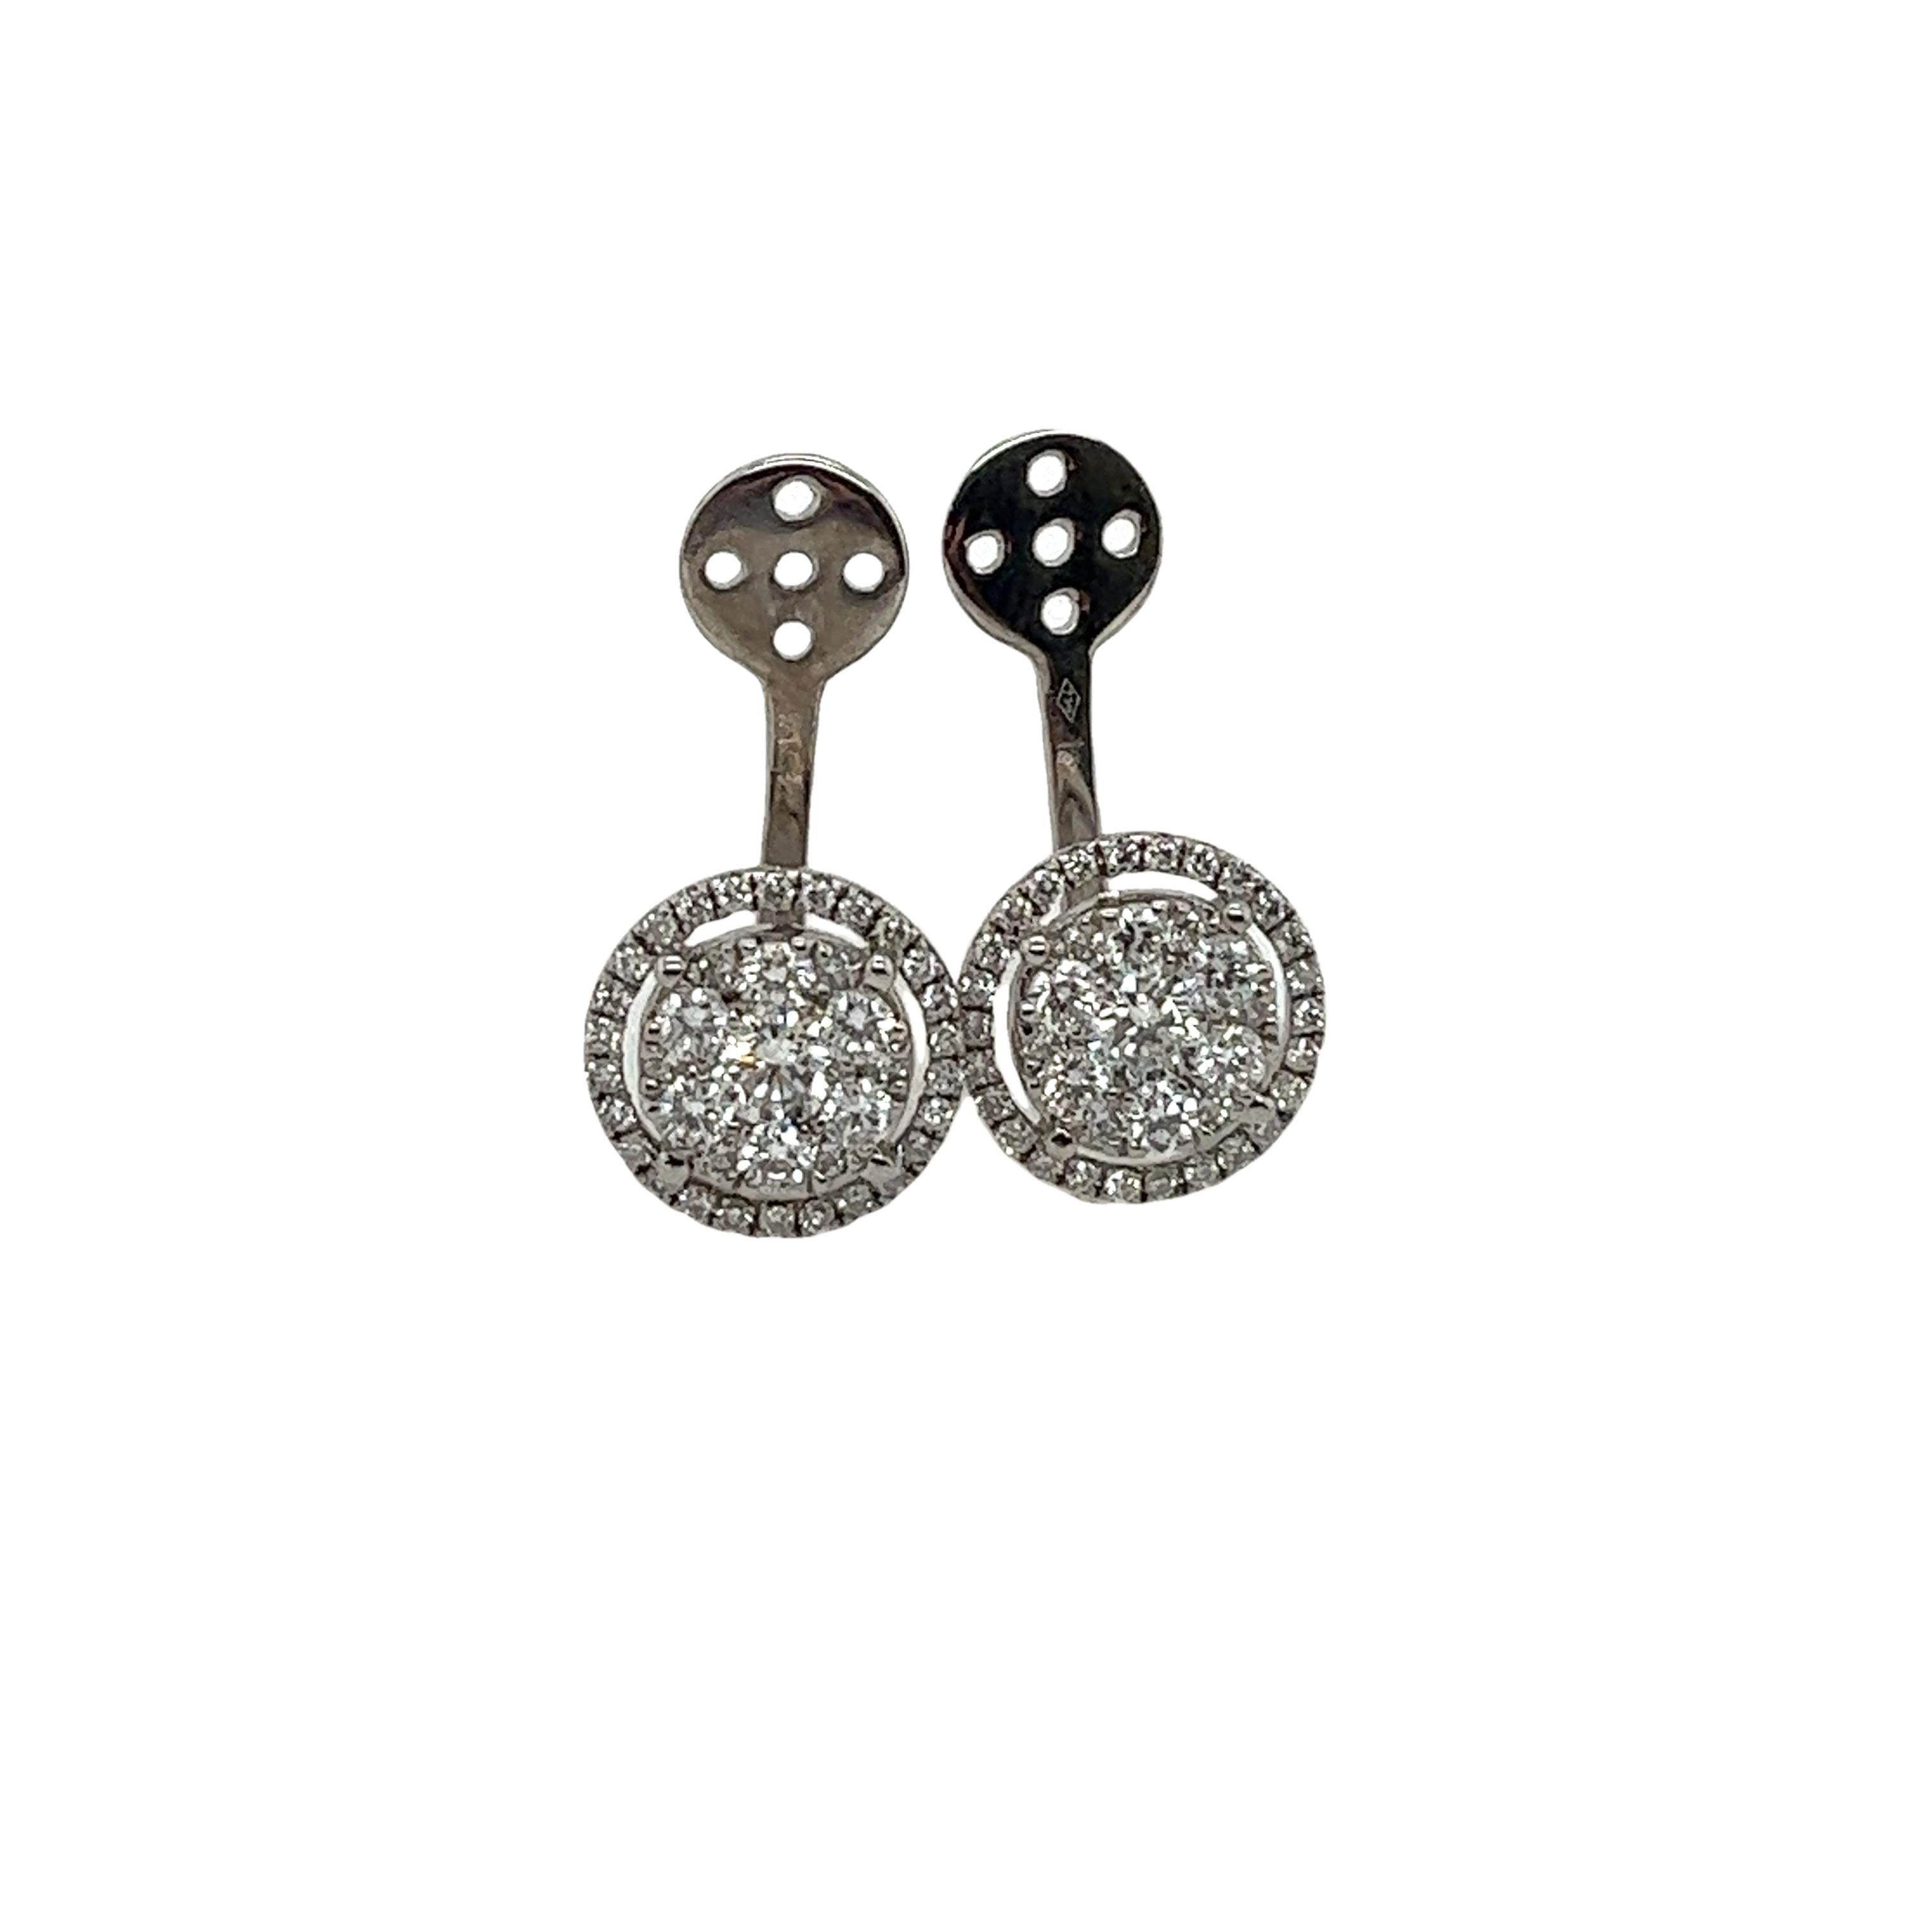 Round Cut 18ct White Gold Earring Jackets fit Behind any Stud Earring, with 1.0ct Diamonds For Sale